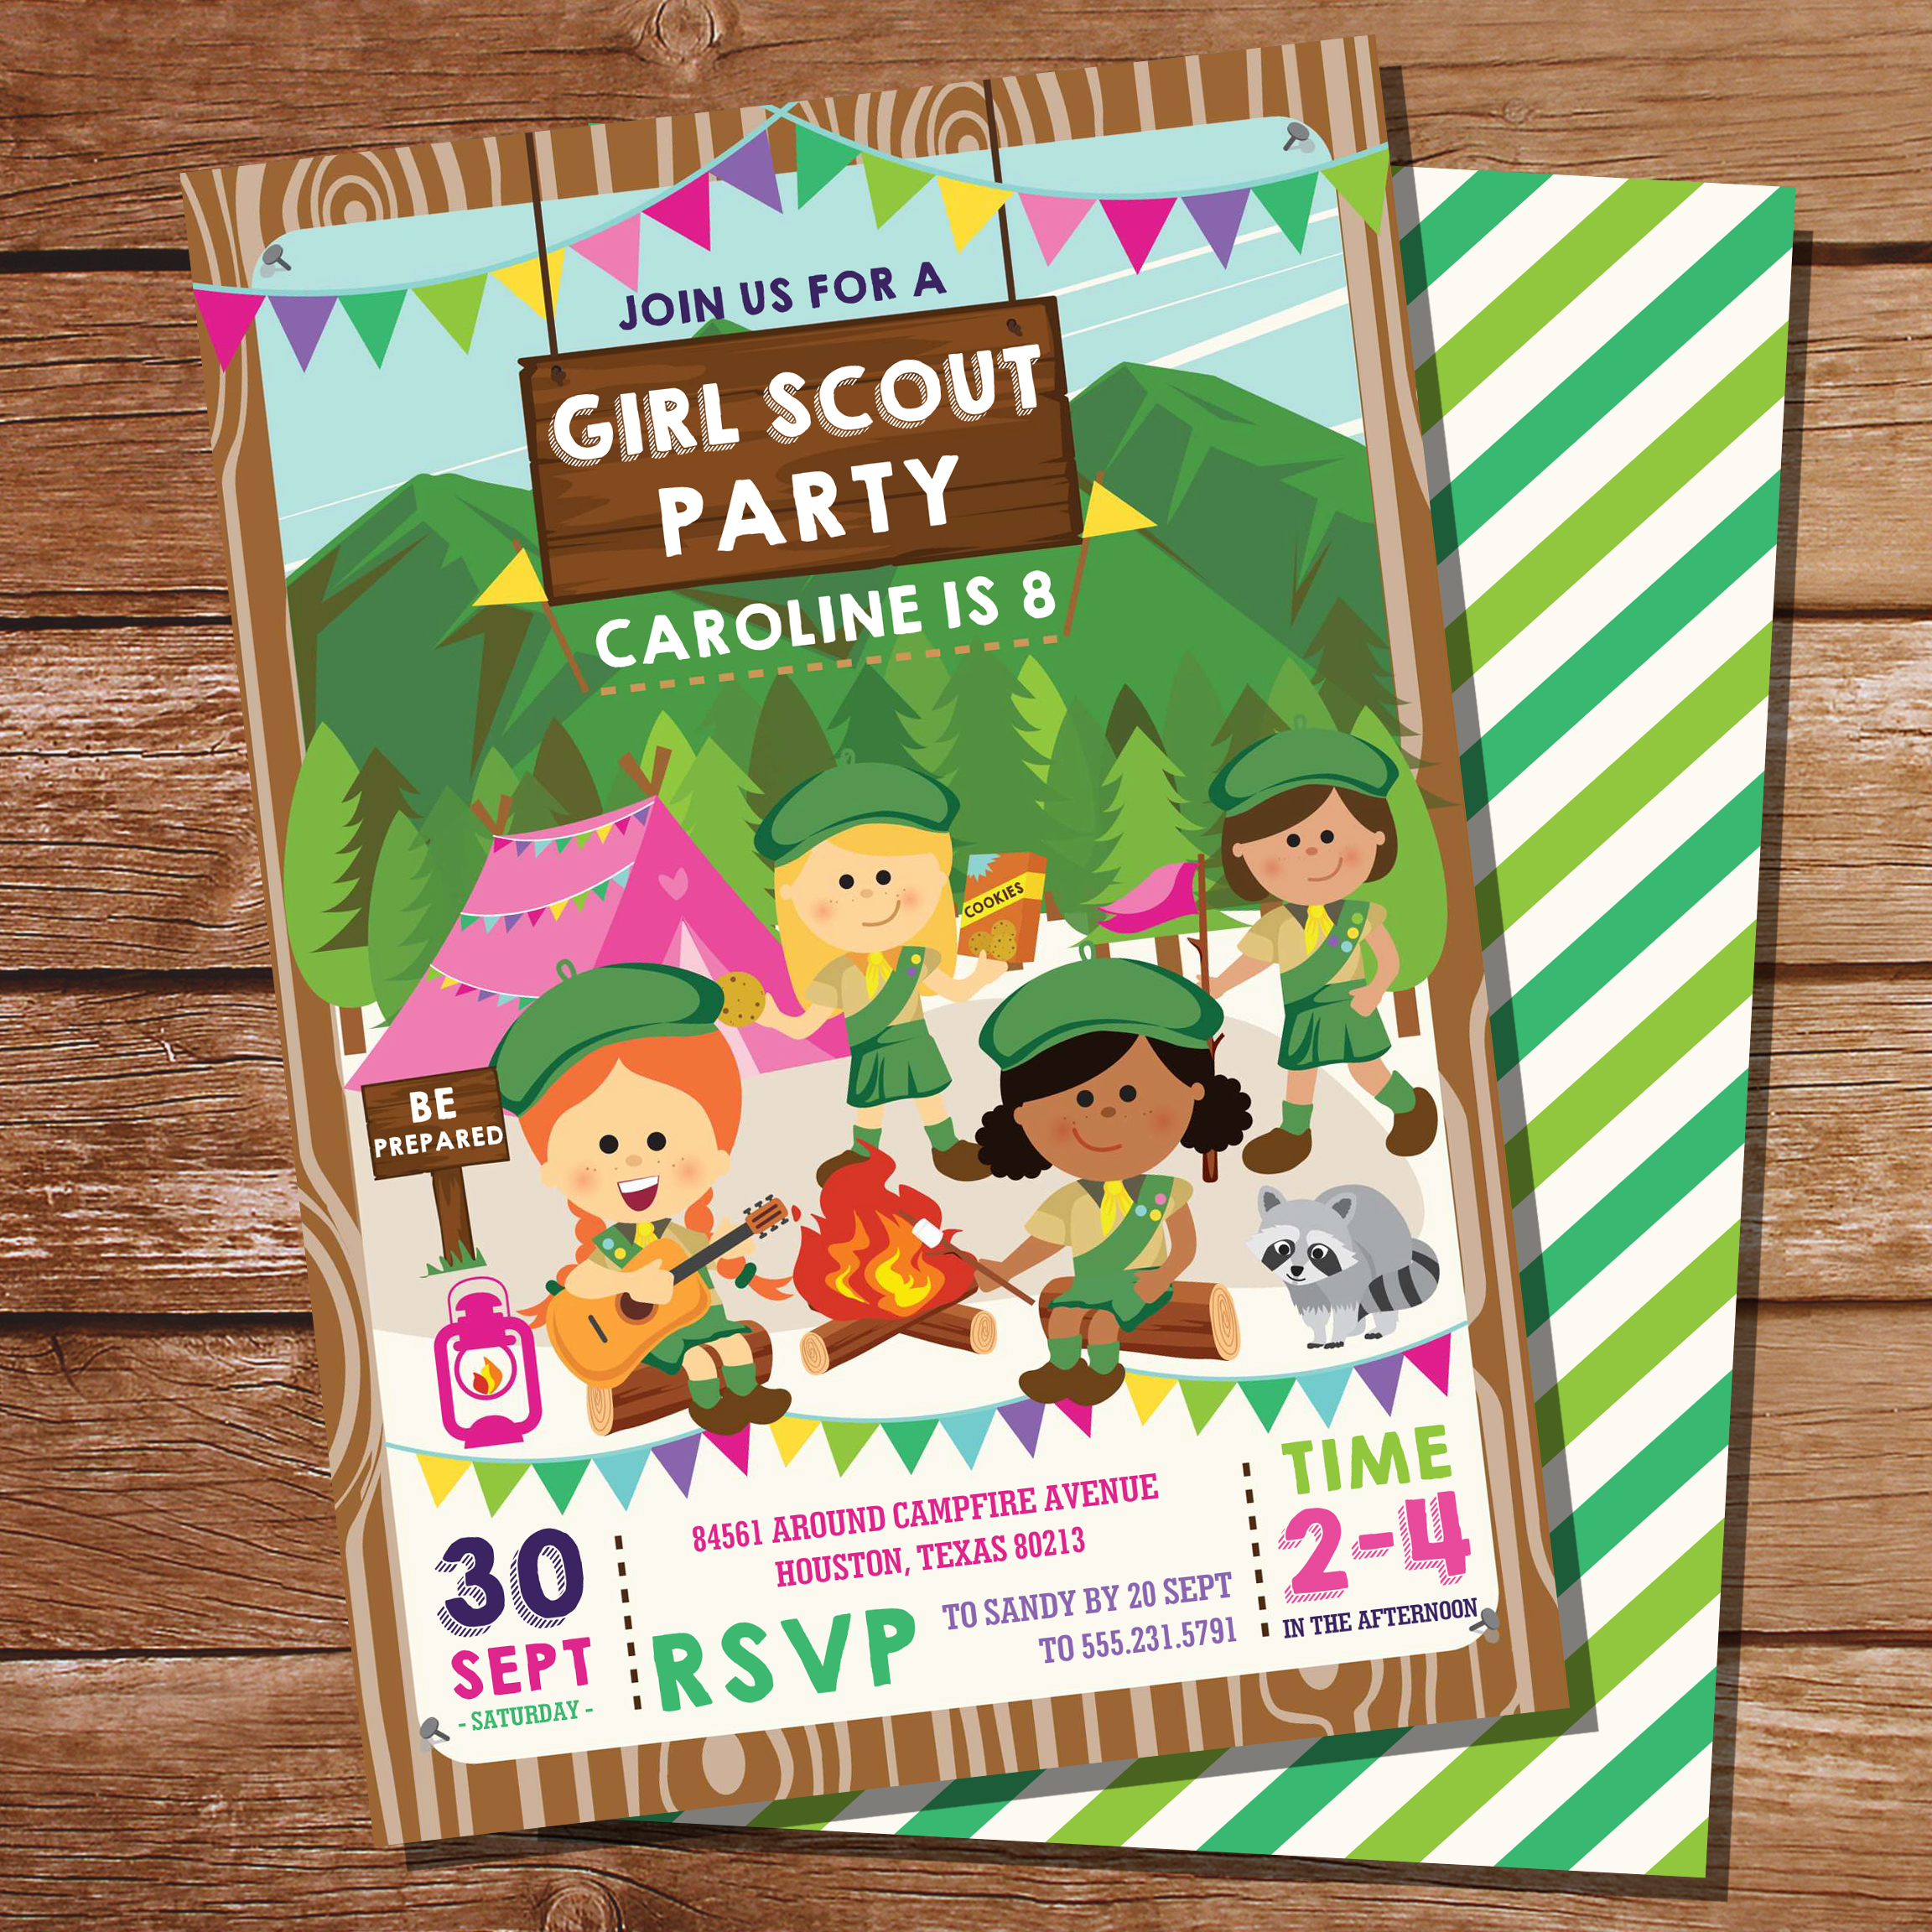 Editable Girl Scout Party Invitations